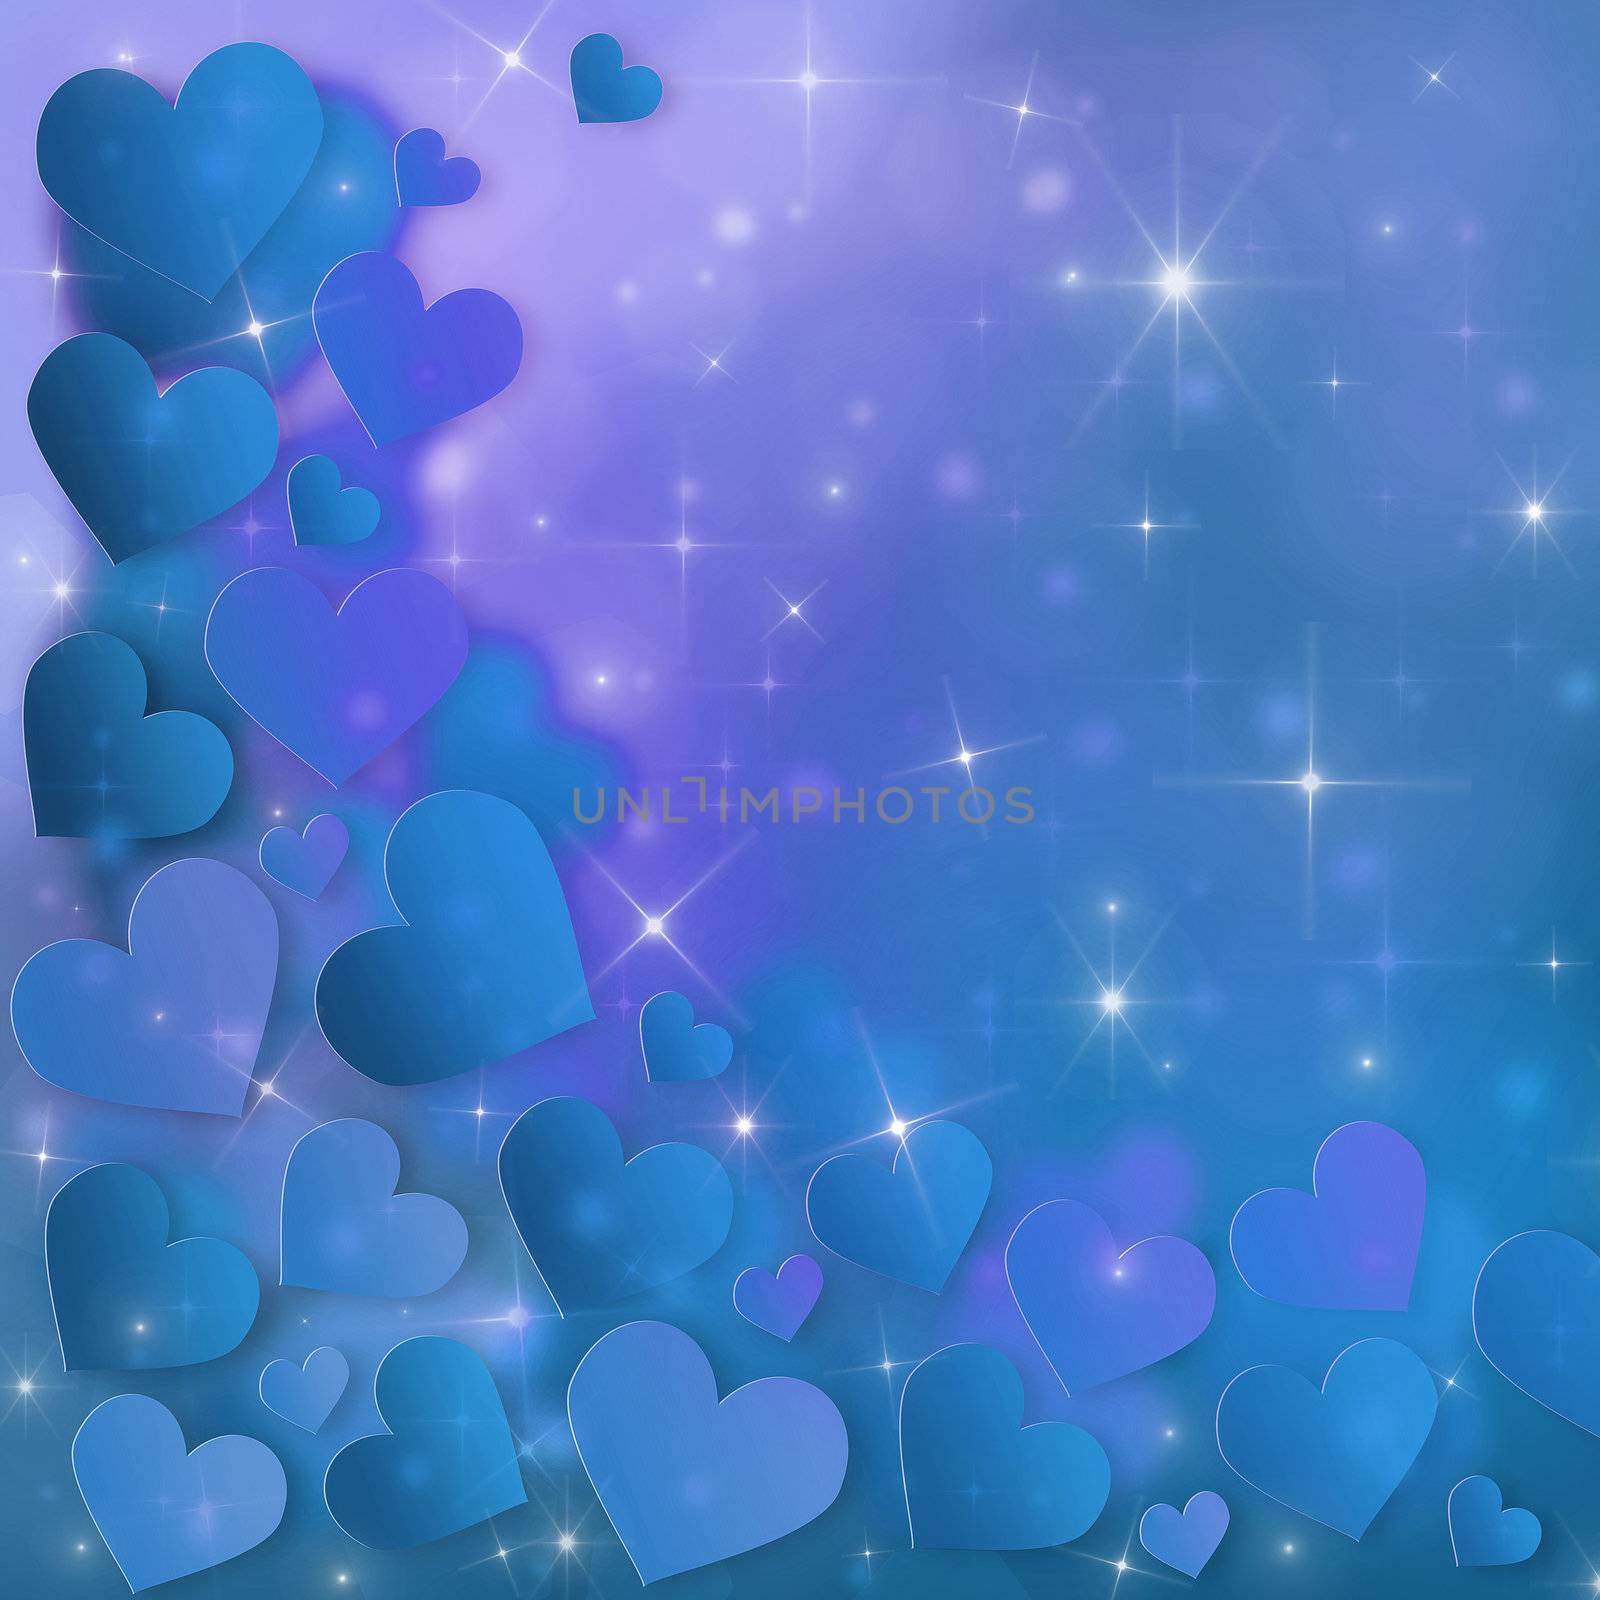 Valentine`s Day Card with blue hearts and stars